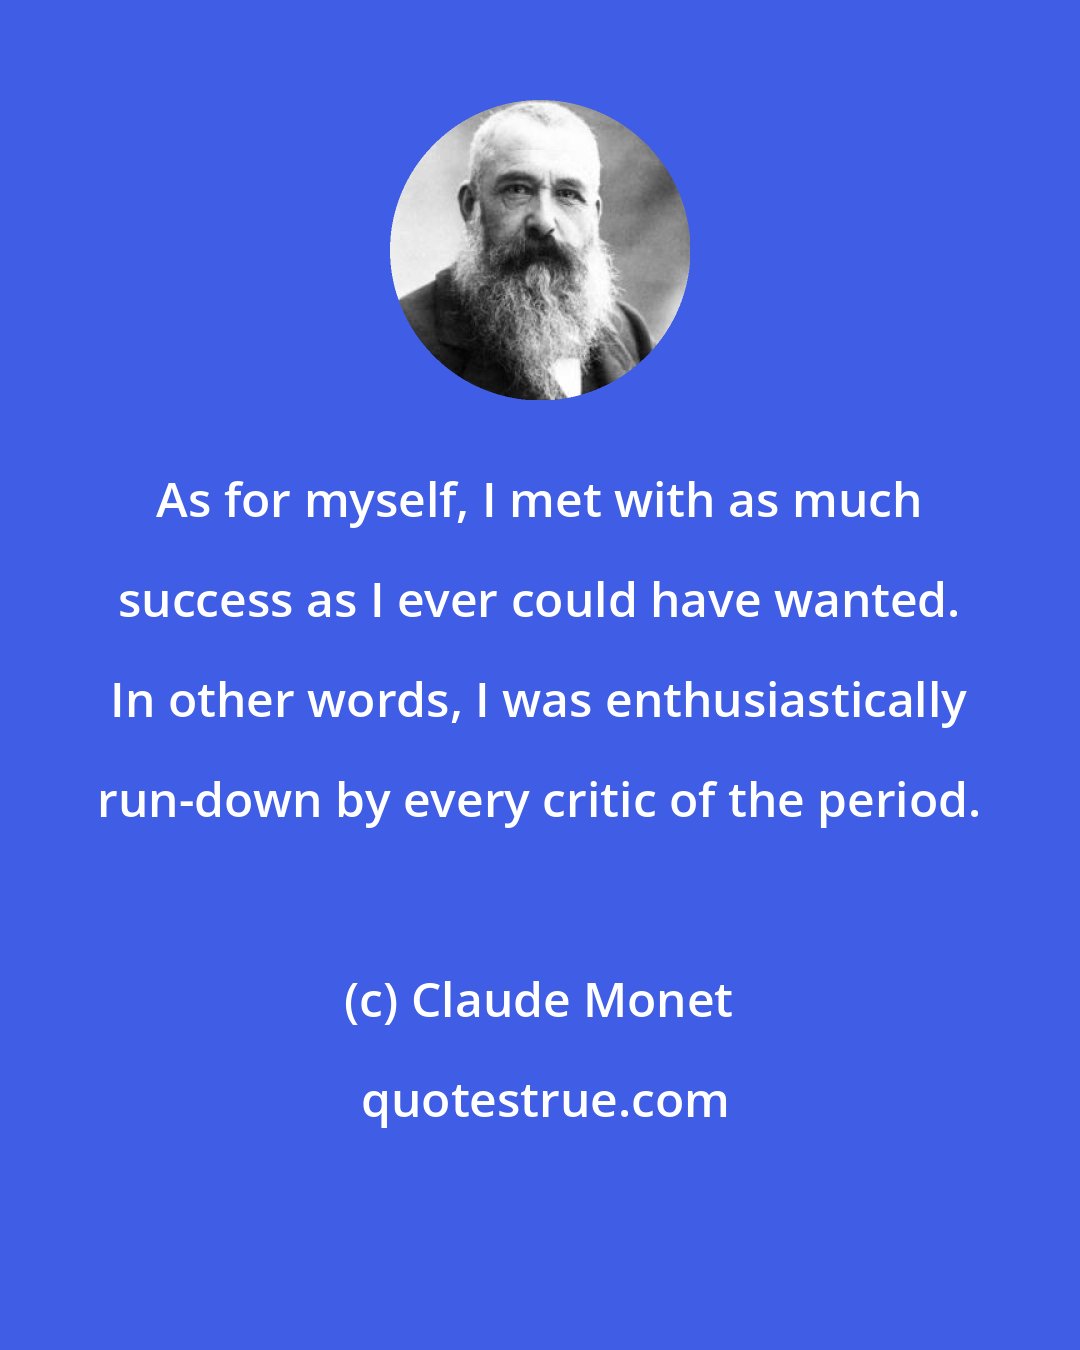 Claude Monet: As for myself, I met with as much success as I ever could have wanted. In other words, I was enthusiastically run-down by every critic of the period.